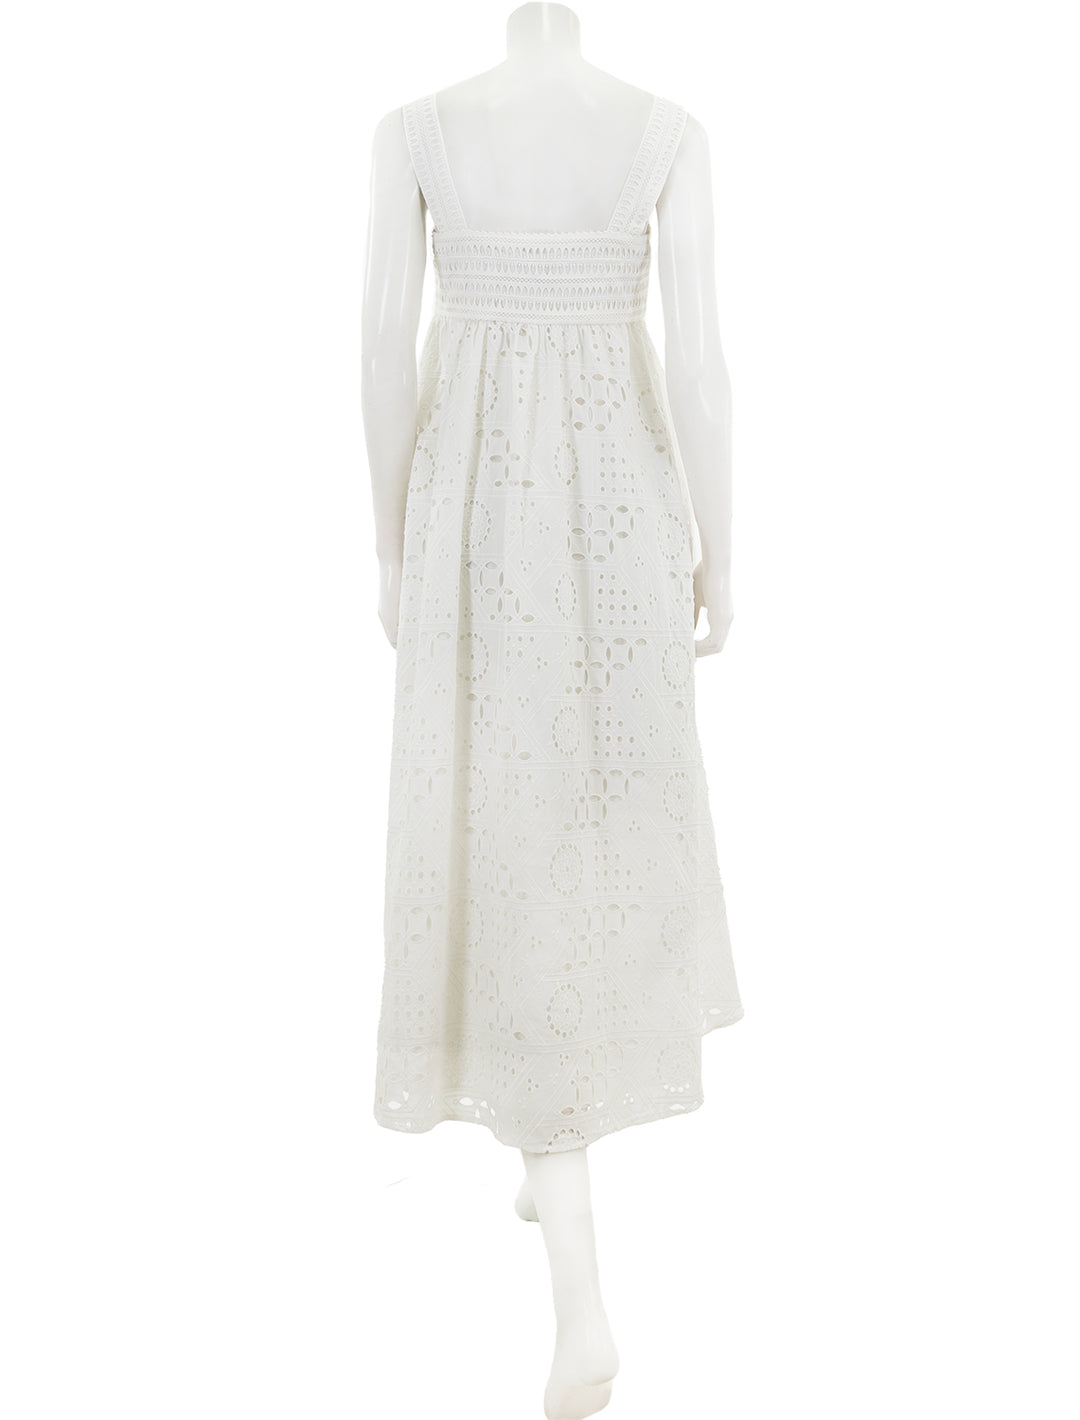 back view of broderie anglaise maxi dress in white